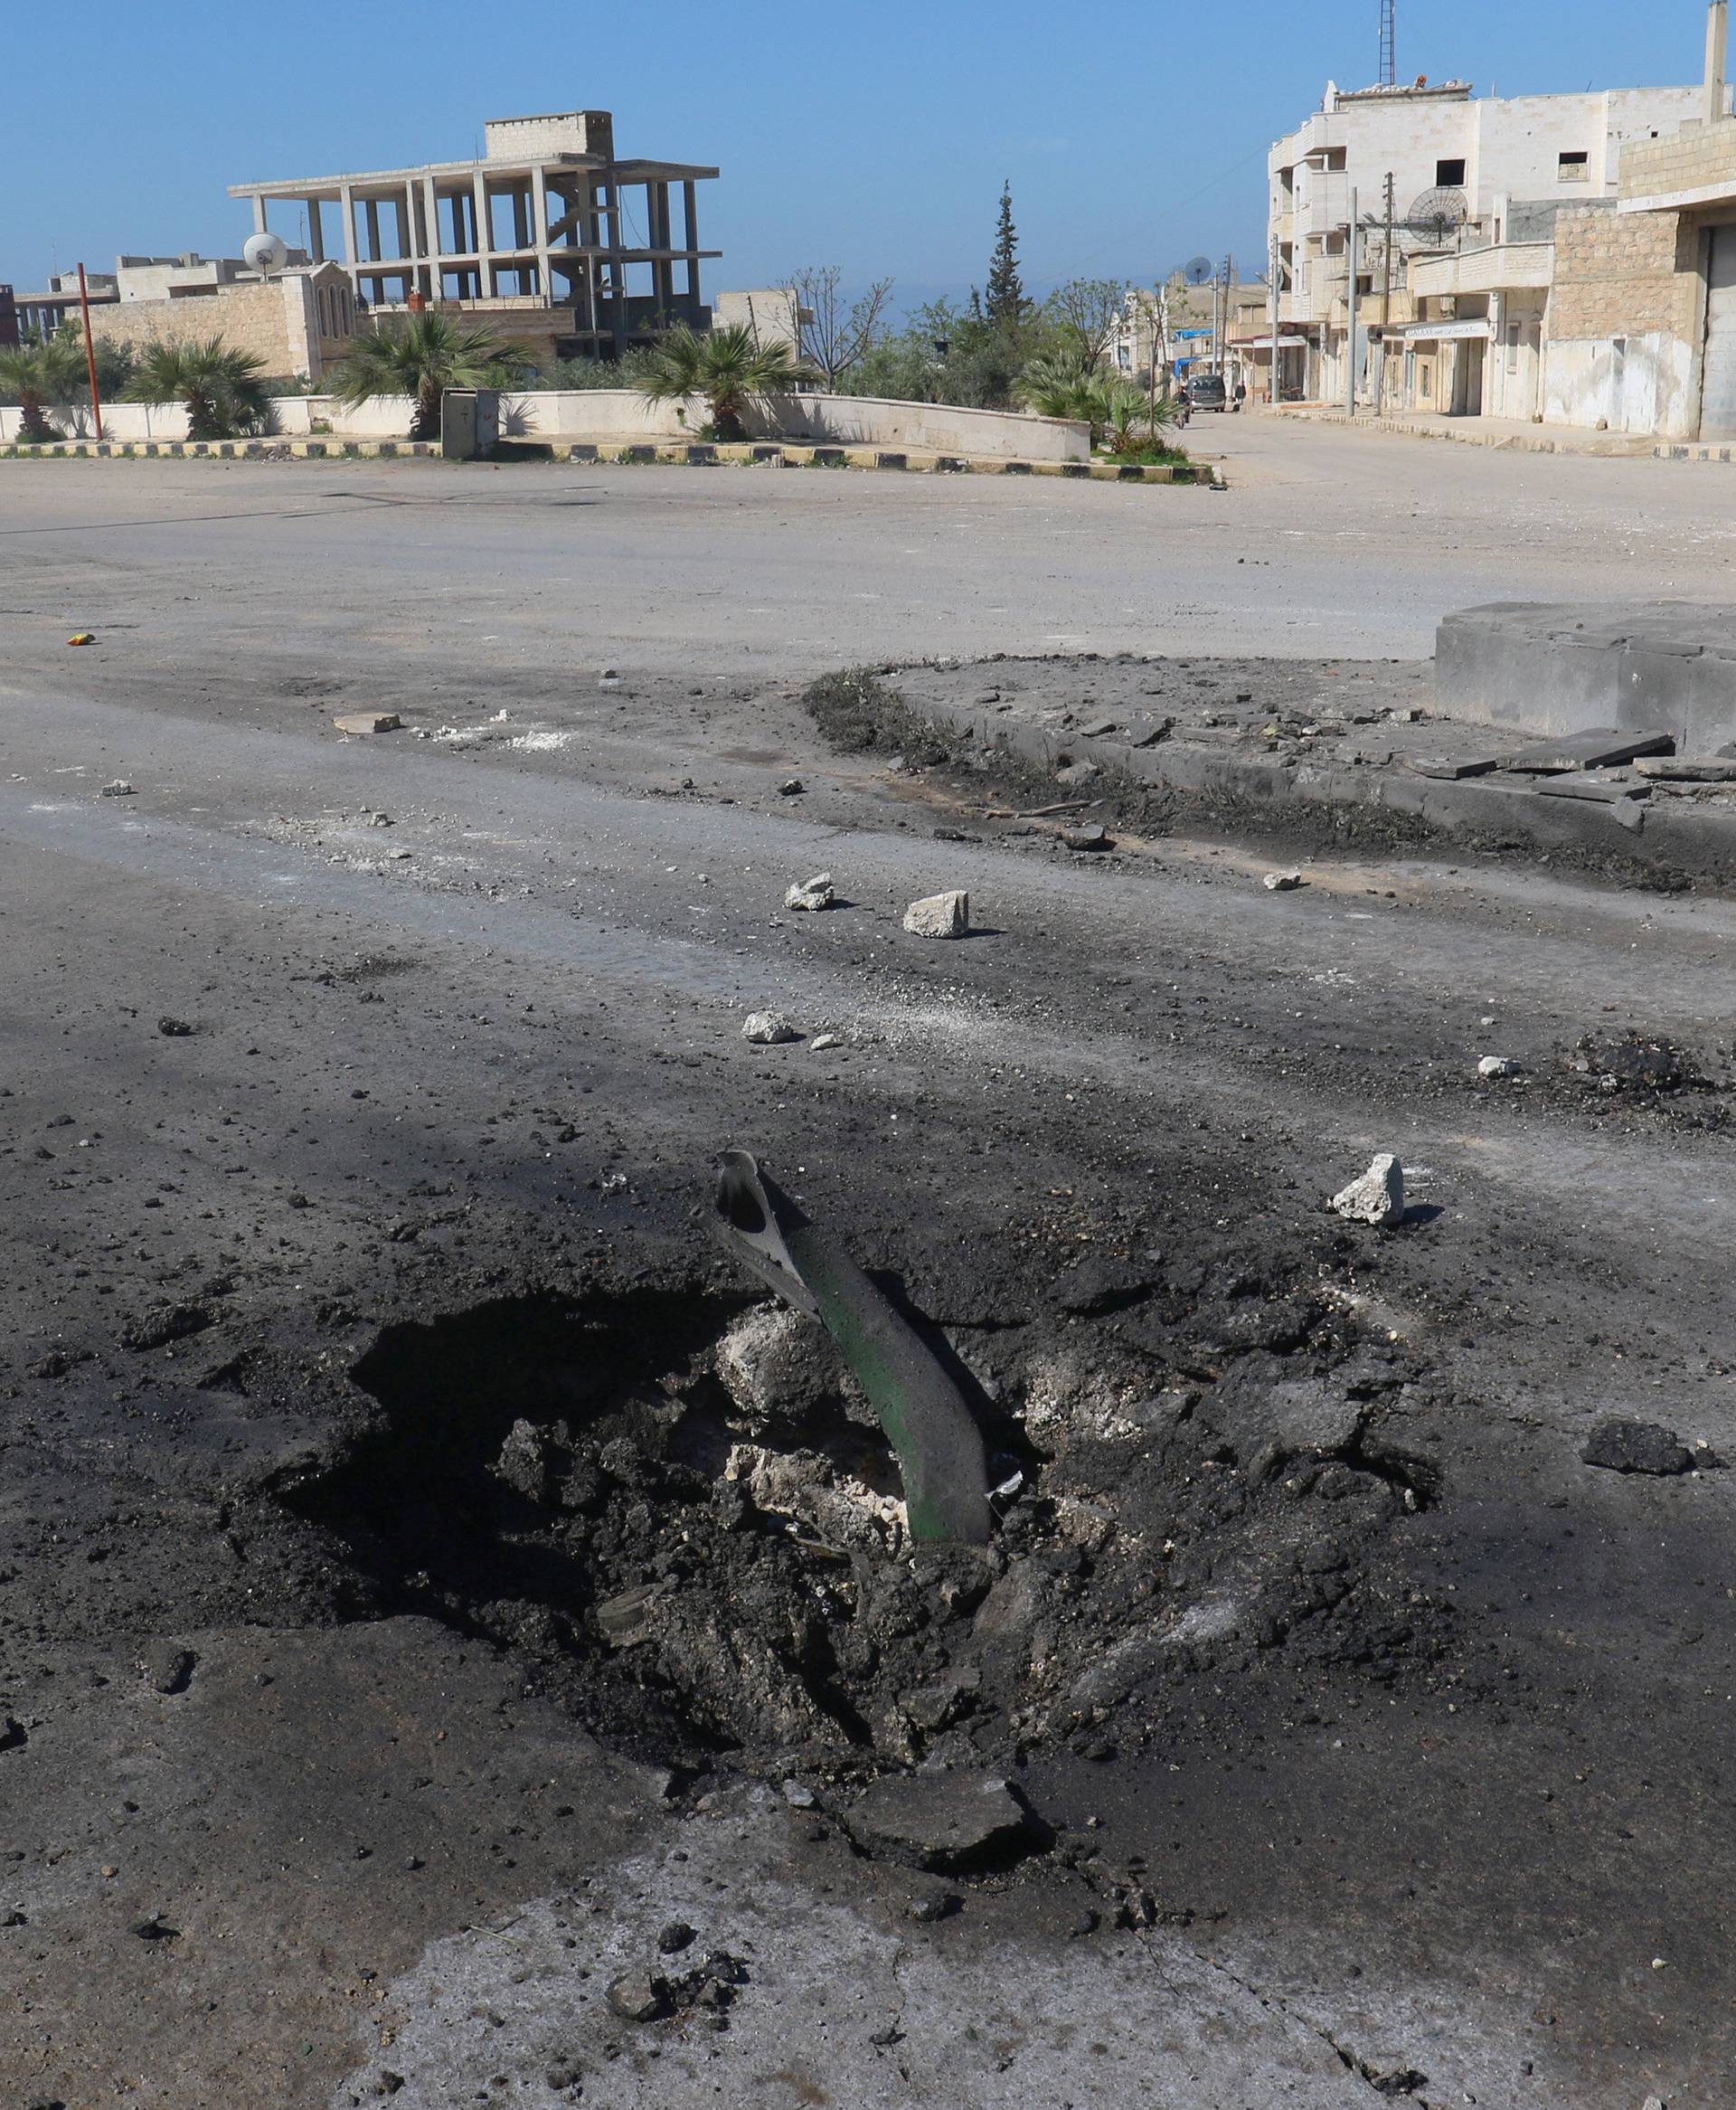 A crater is seen at the site of an airstrike, after what rescue workers described as a suspected gas attack in the town of Khan Sheikhoun in rebel-held Idlib